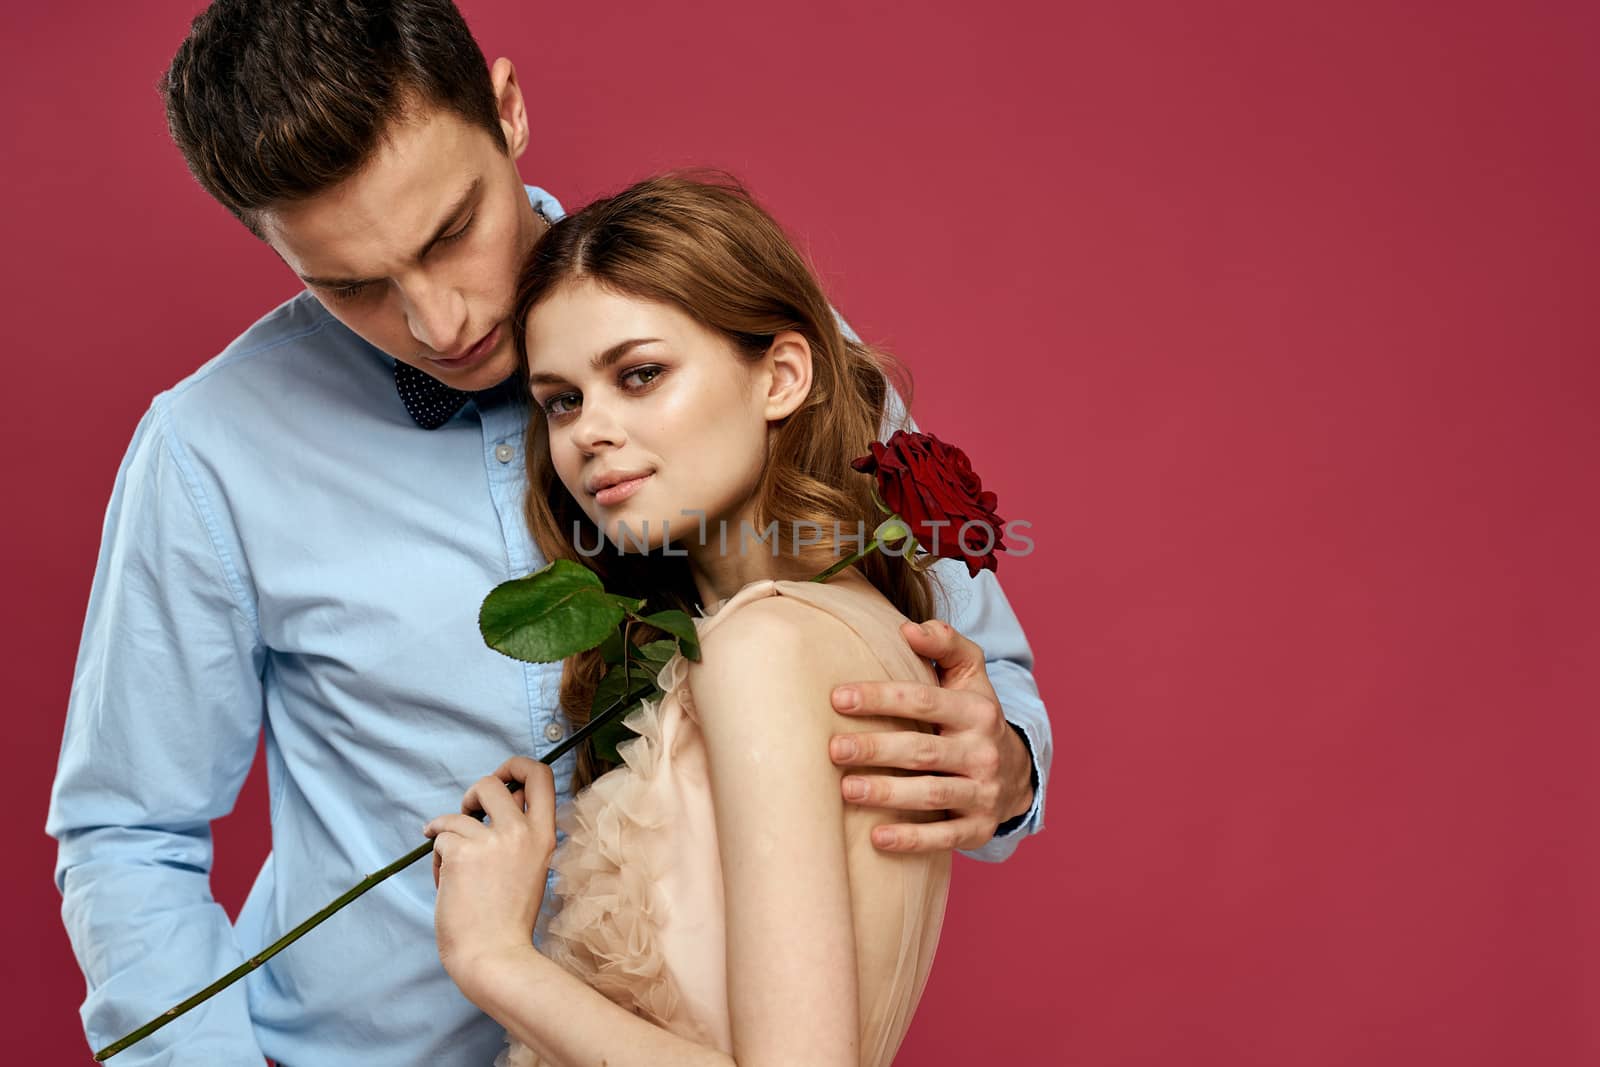 Lovers people with rose in hands on pink isolated background hug emotions happiness romance feelings by SHOTPRIME